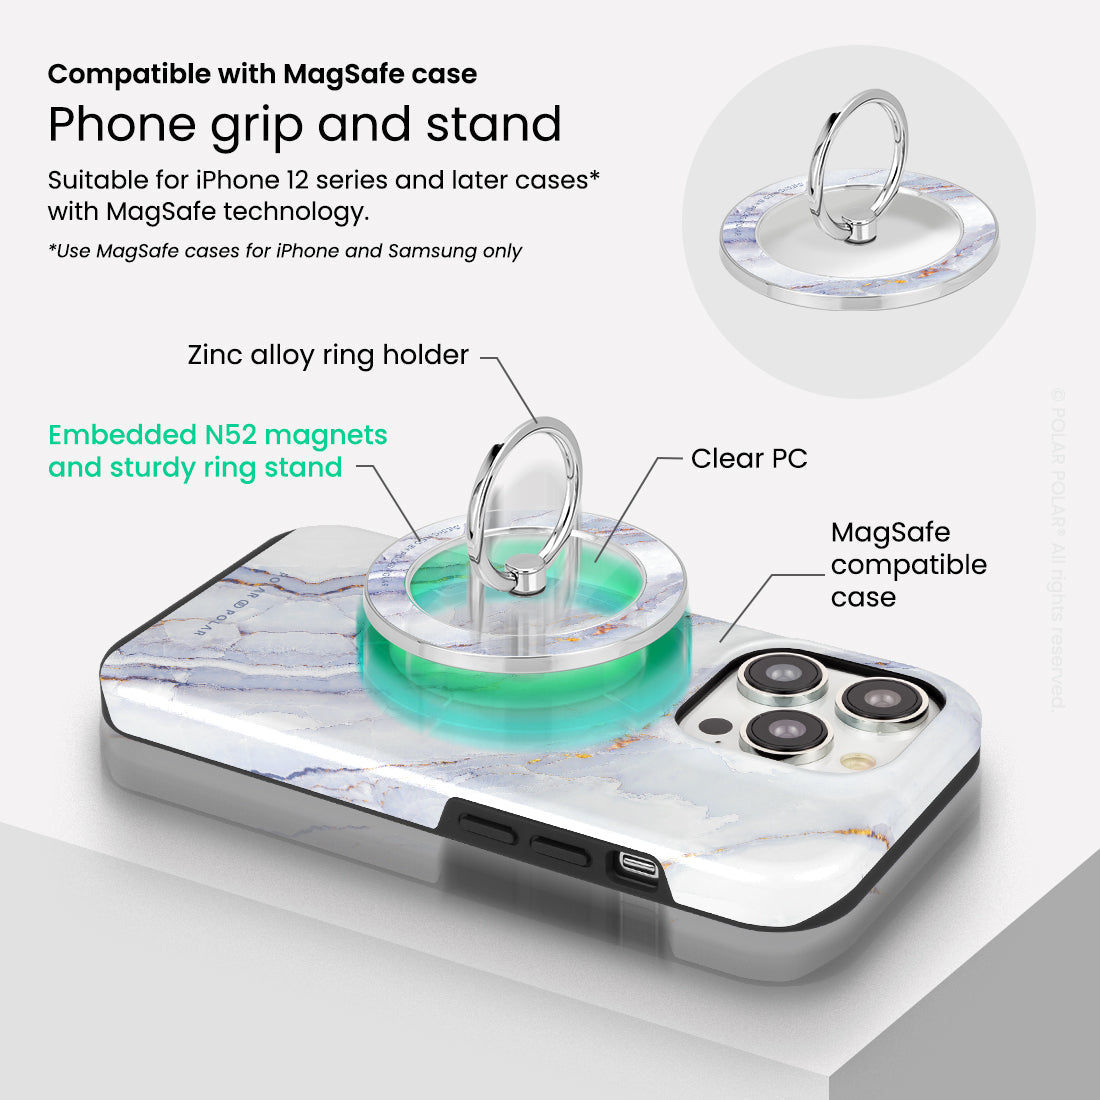 Standard_MagSafe Phone Grip and Ring Holder